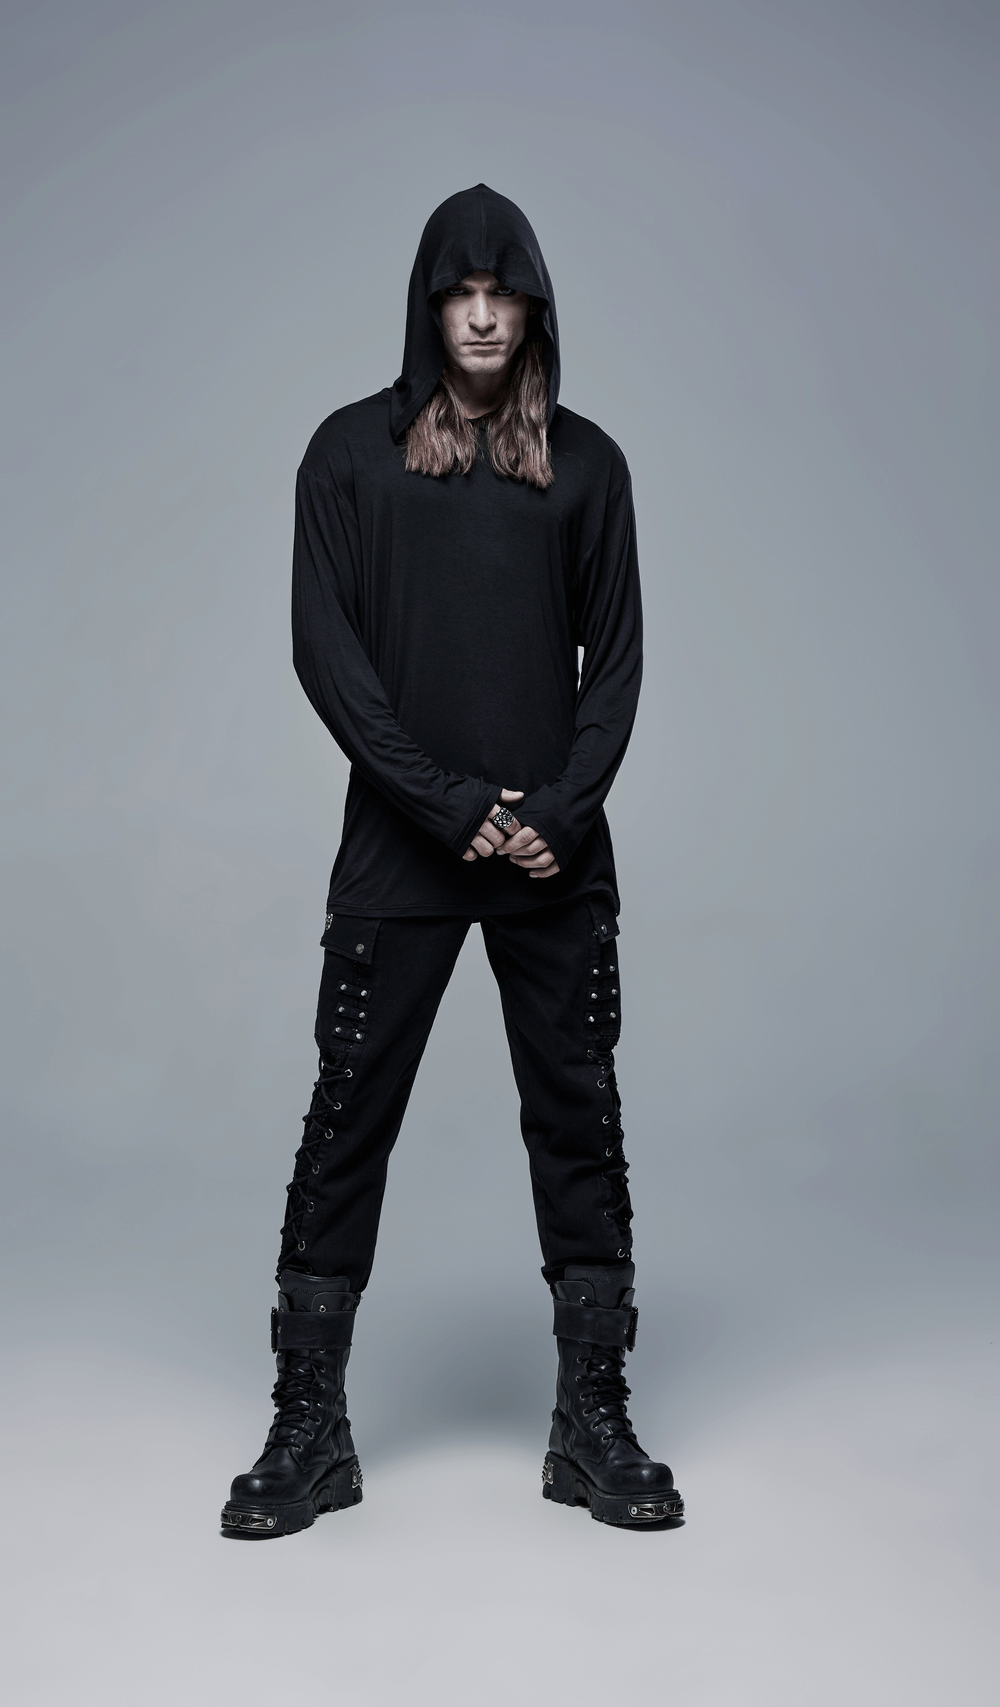 Chic Gothic Loose Male Hoodie with Mesh Overlay - HARD'N'HEAVY